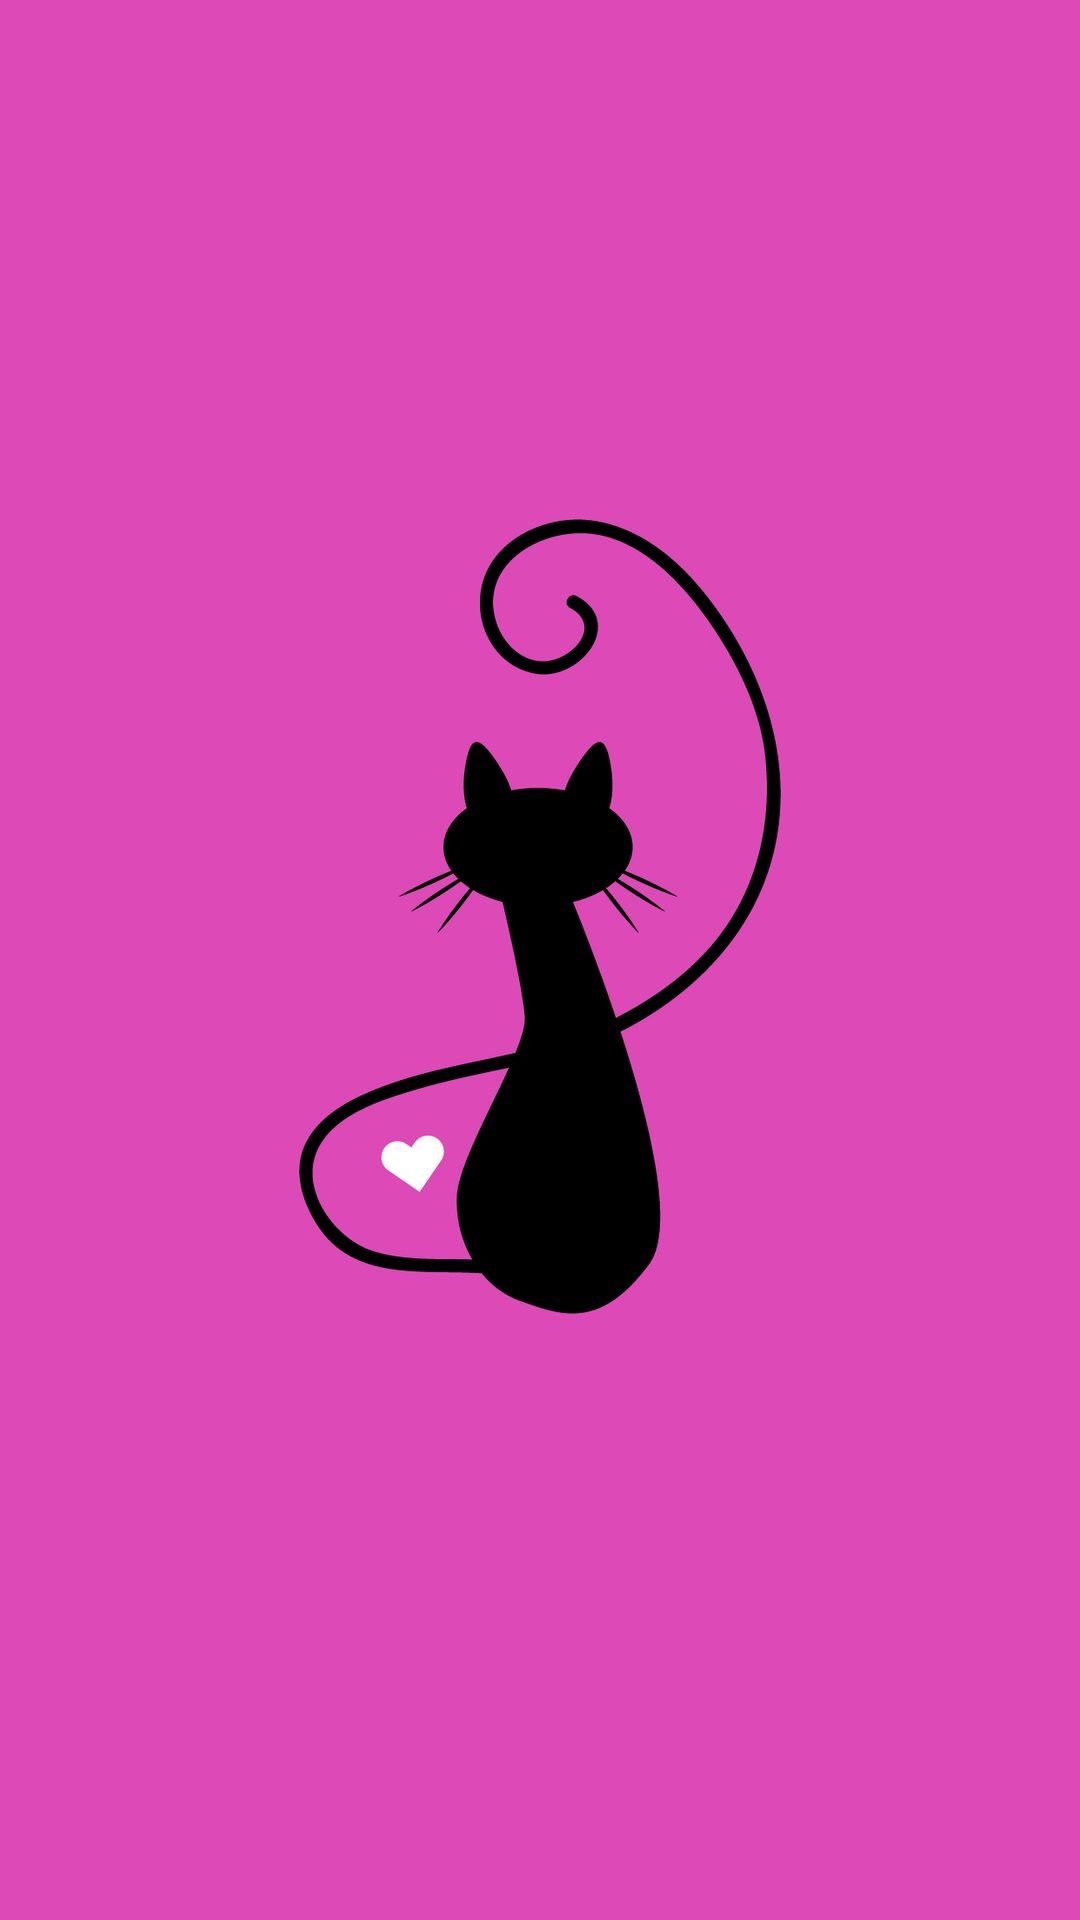 Meow Wallpaper HD Cute – Apps on Google Play